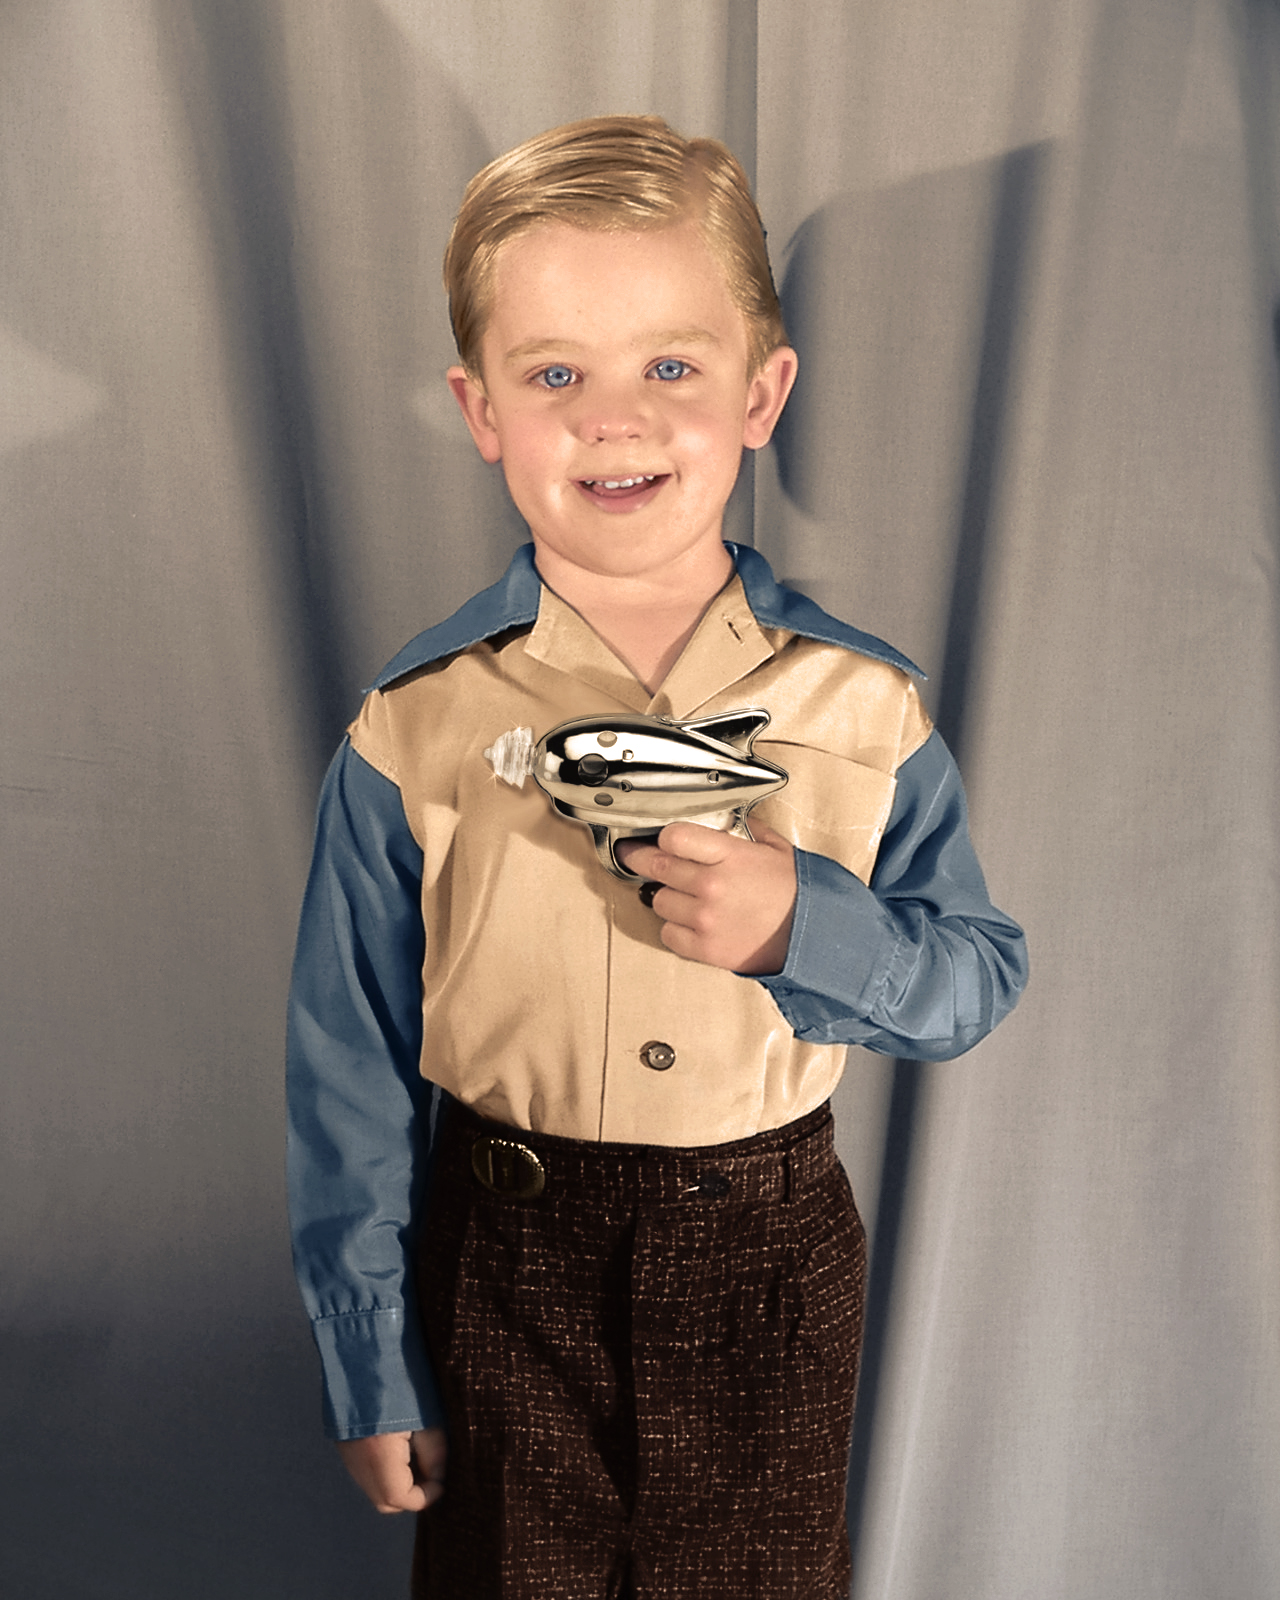 15. A boy shows off his ray gun, around the 1950s